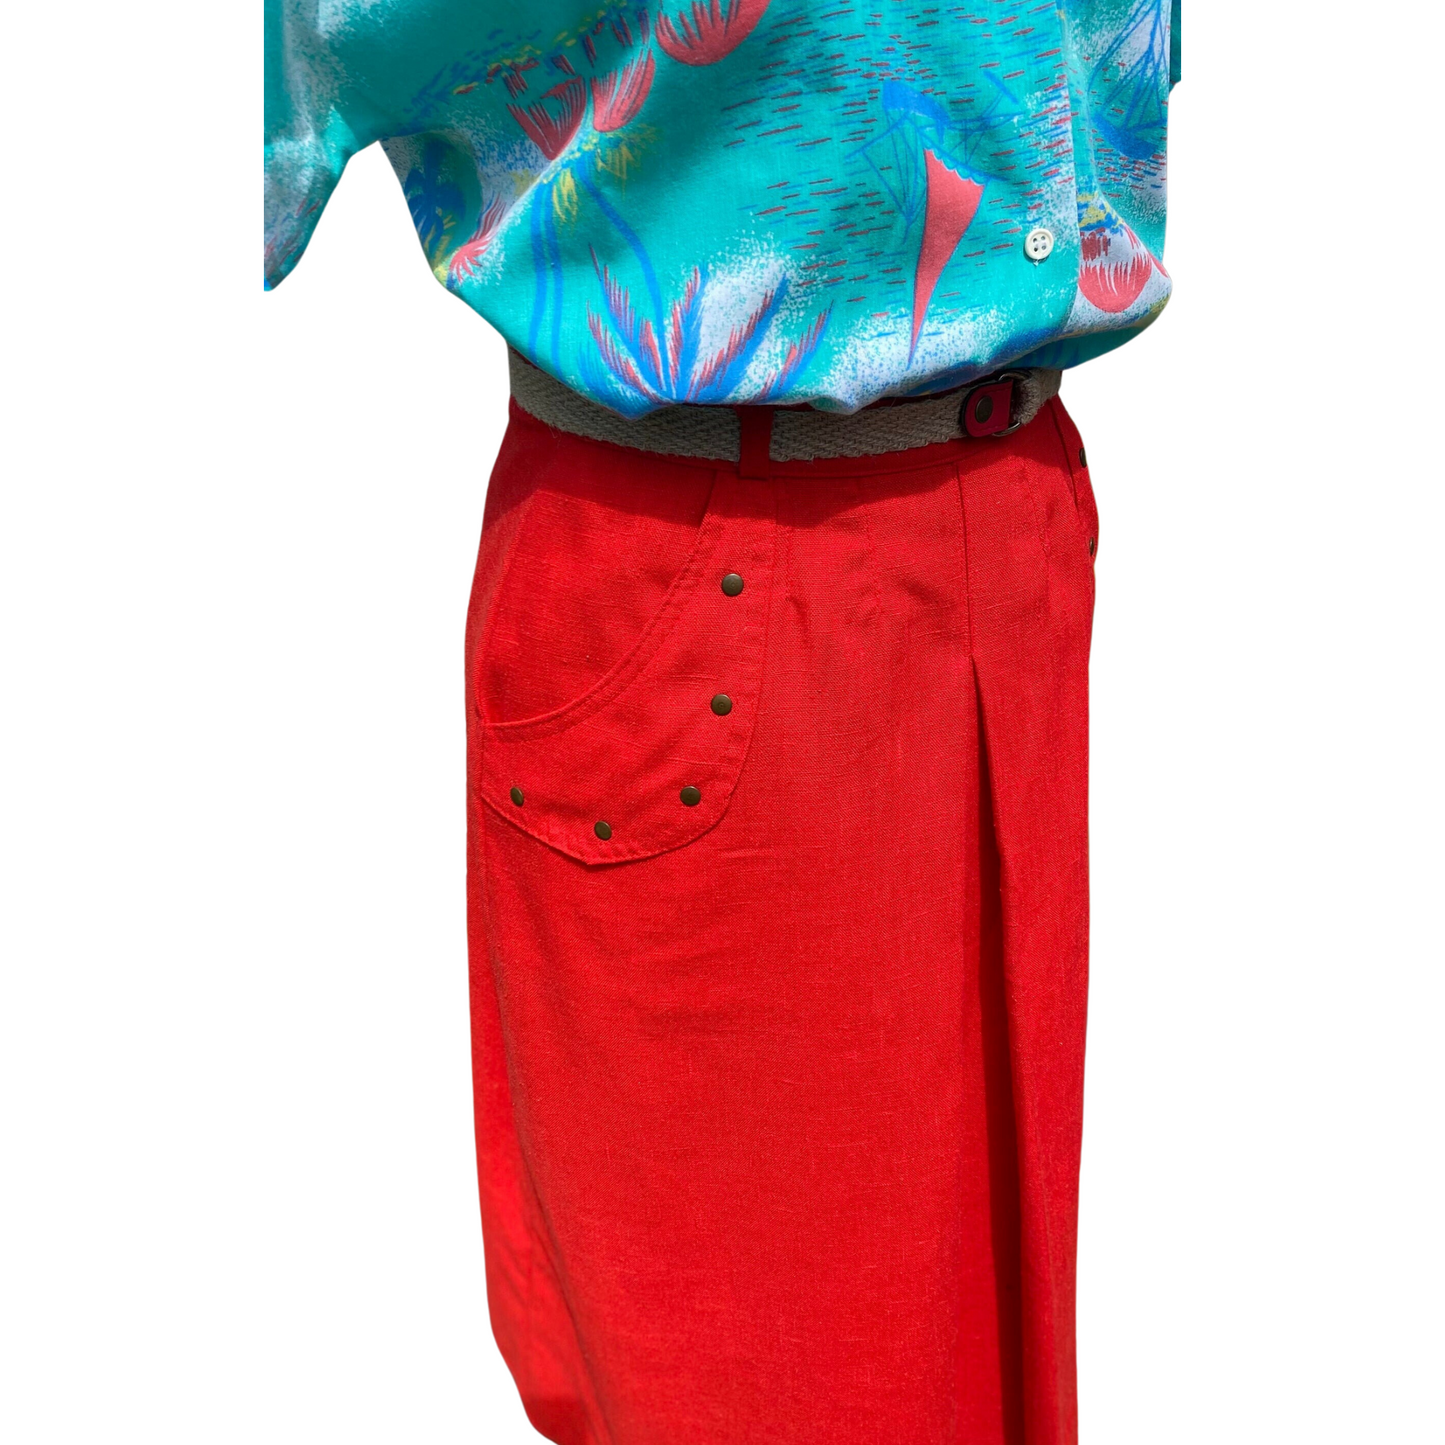 80s red midi skirt with matching jute belt. Approx UK size 8-10